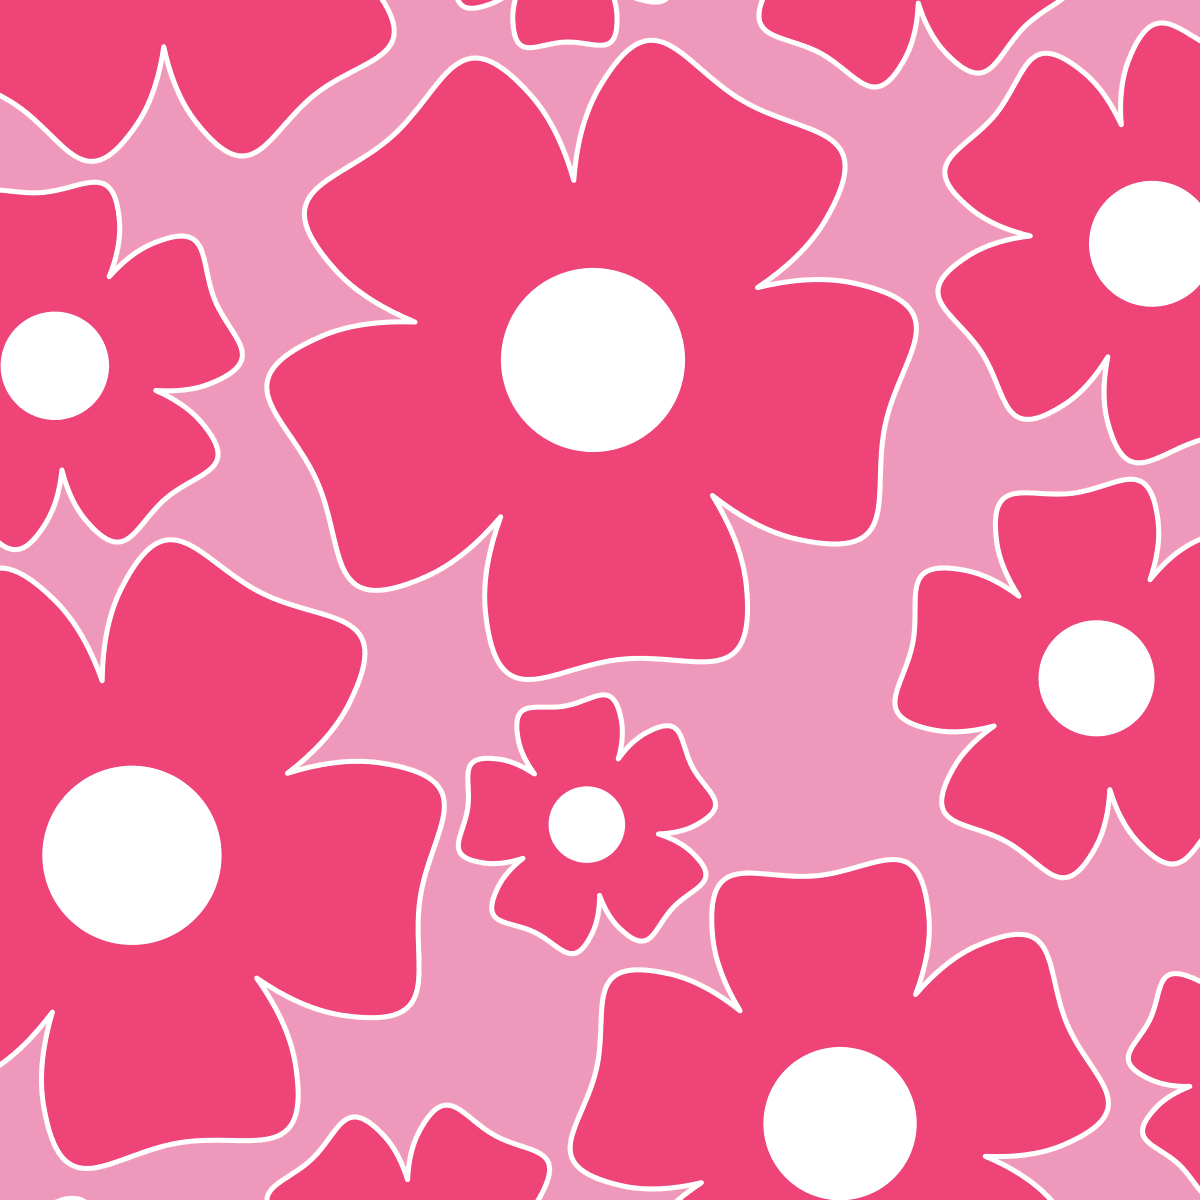 https://digitalpaperpack.com/images/pictures/simple-flowers/simple-flowers.1200x.png